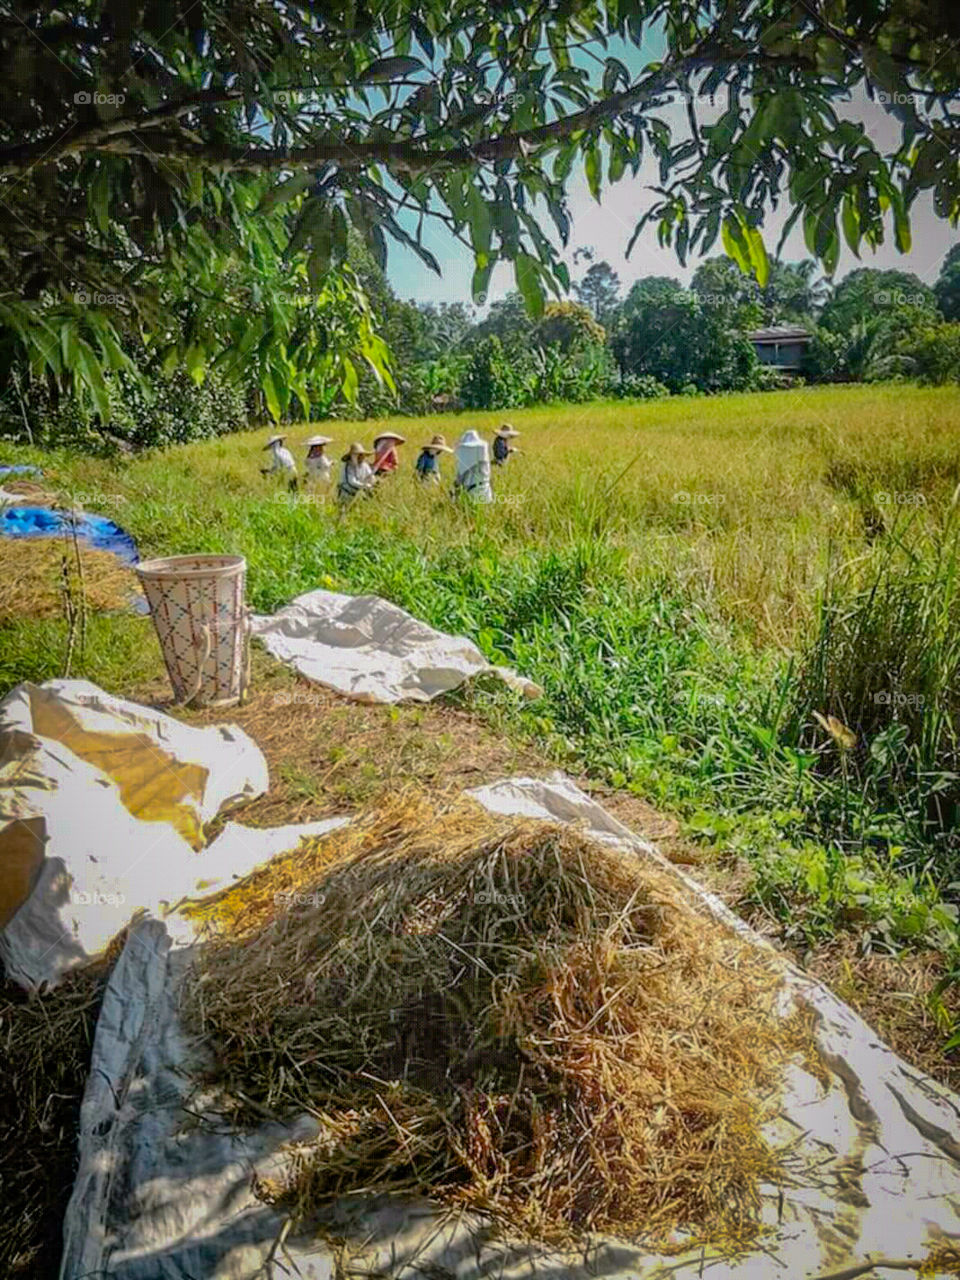 Traditional,  tradition,  Sun,  Paddy,  Rice,  Family,  Hardworking, Money,  Small,  Village.